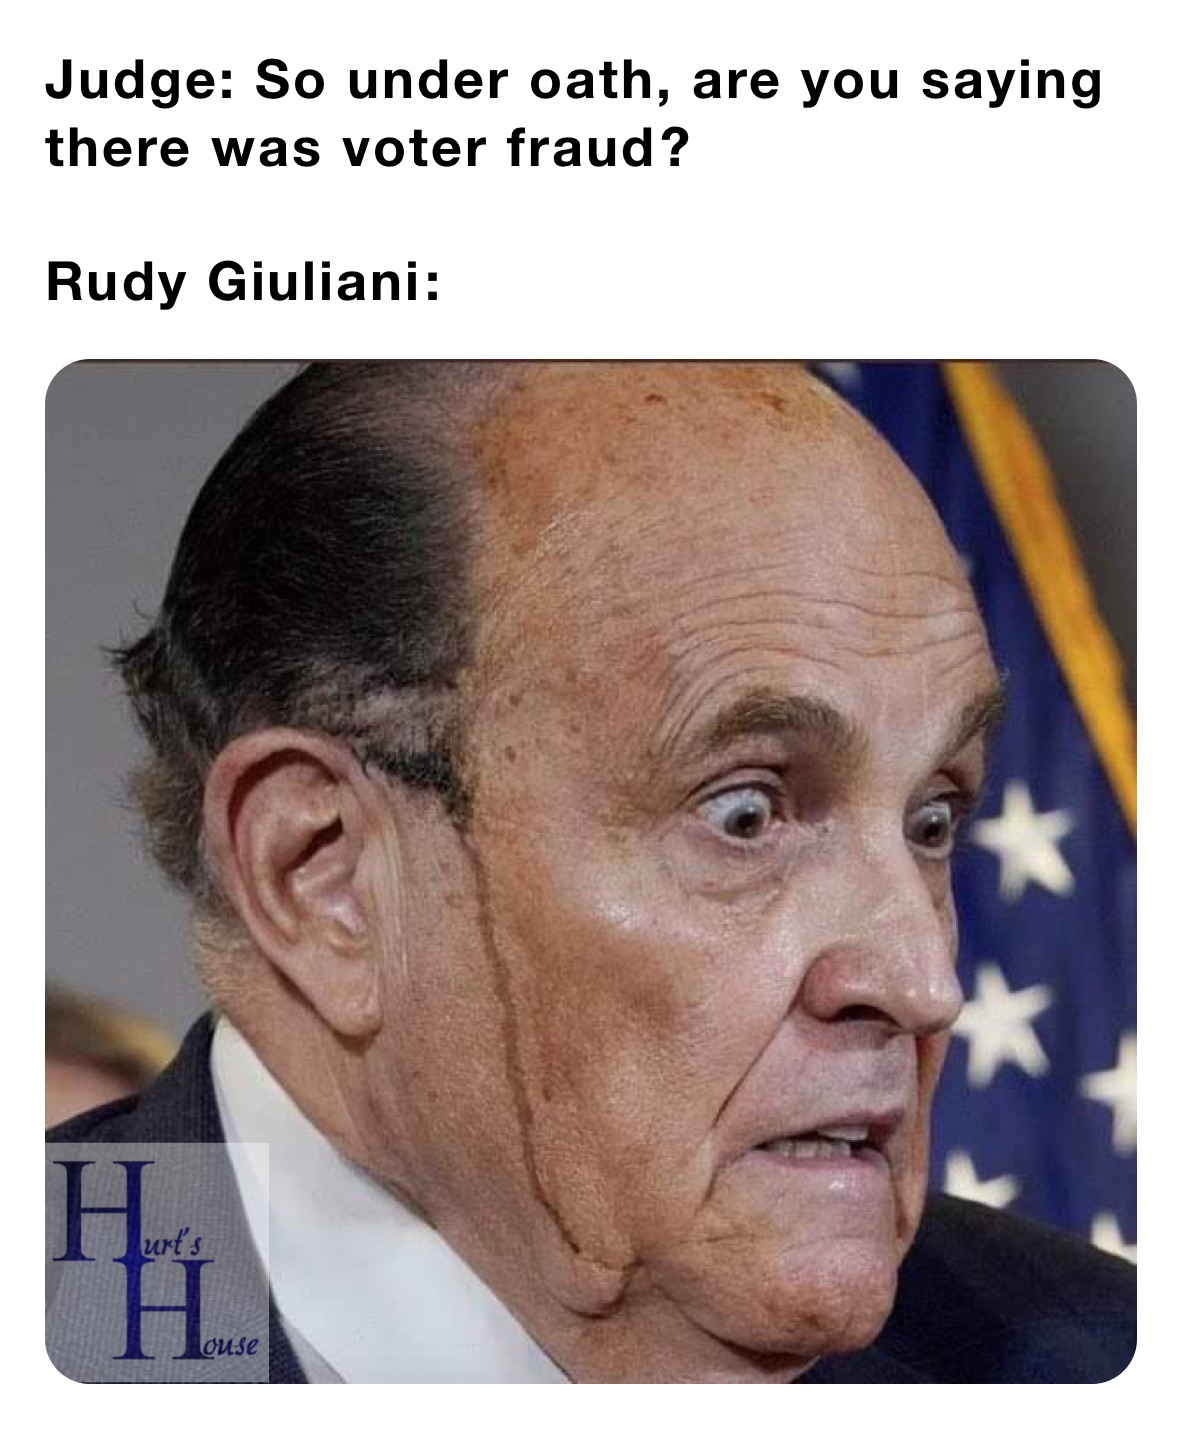 Judge: So under oath, are you saying there was voter fraud￼? 

Rudy Giuliani￼: